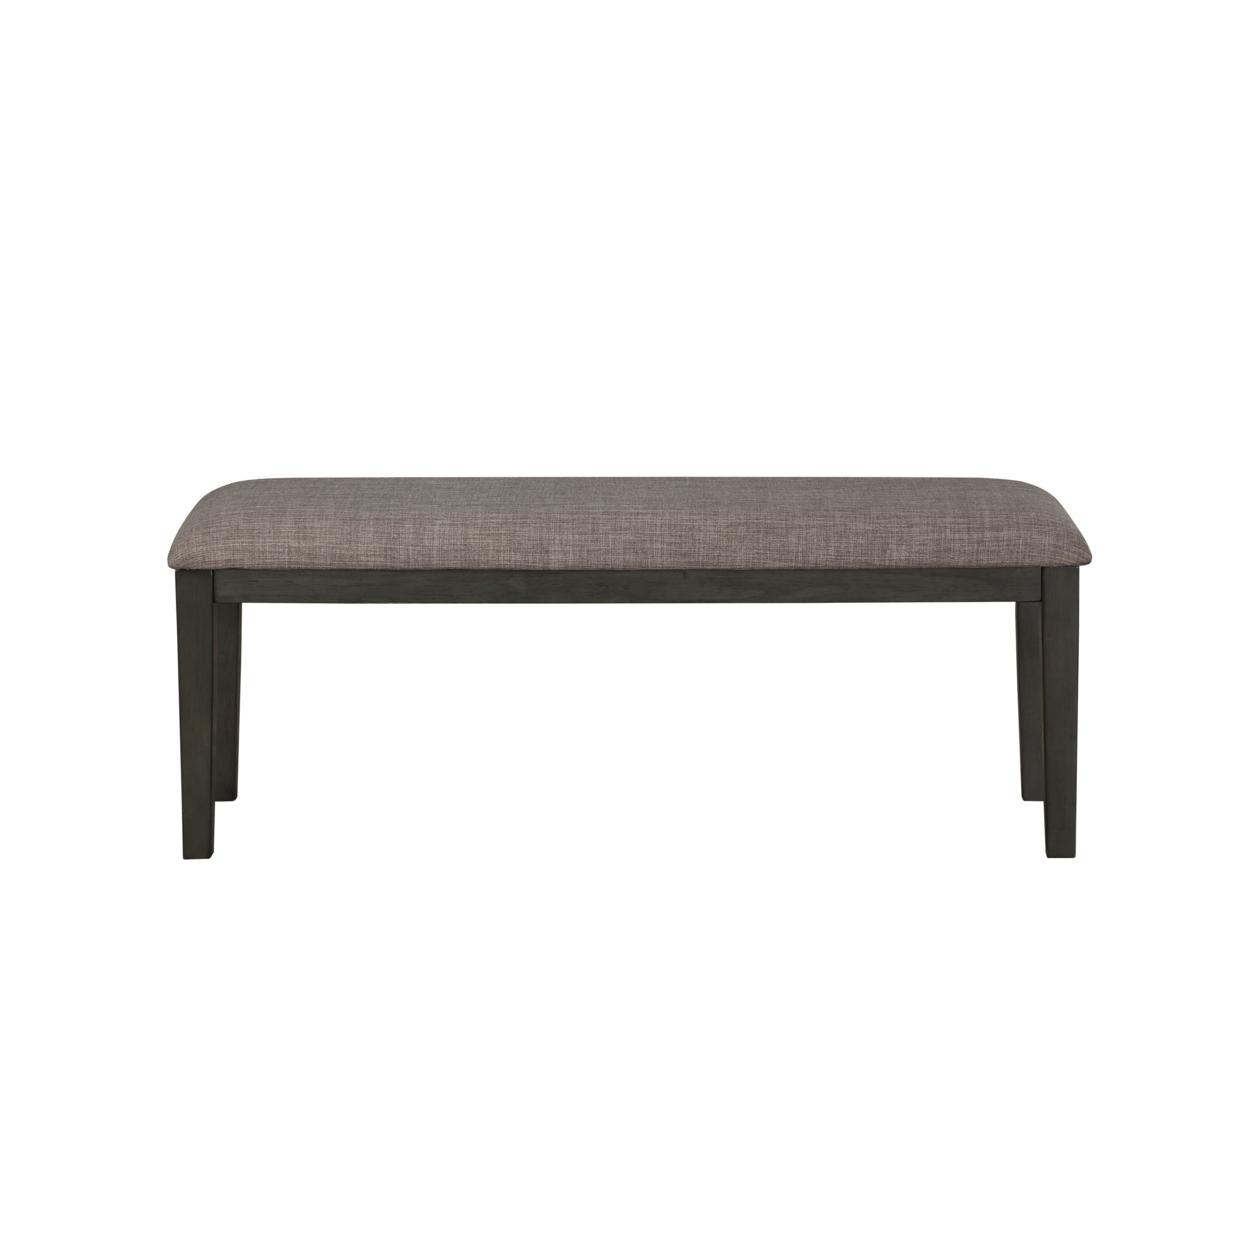 Rectangular Style Wooden Bench With Fabric Upholstered Seat, Gray And Beige- Saltoro Sherpi